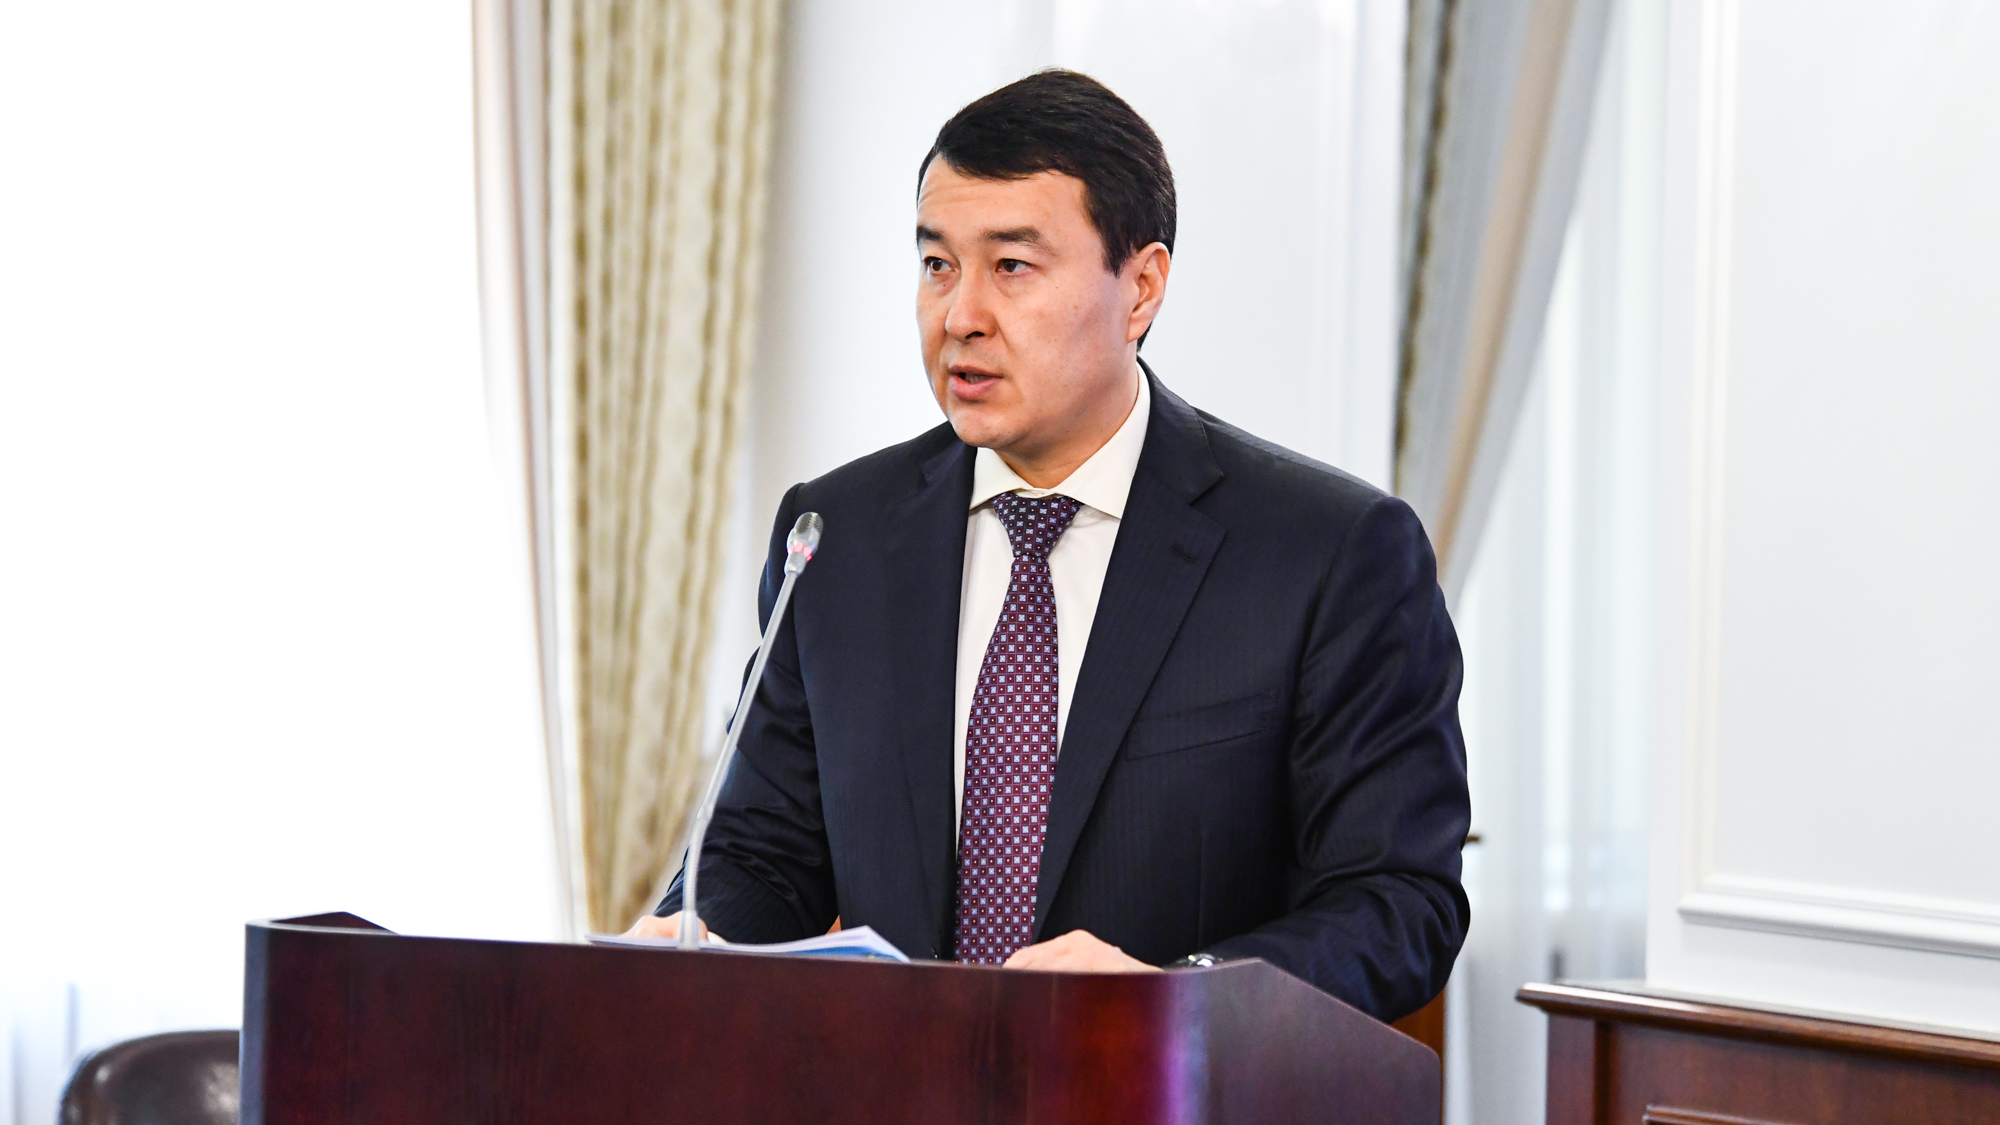 Costs of implementing Employment Roadmap to increase to 1 trillion tenge — Ministry of Finance